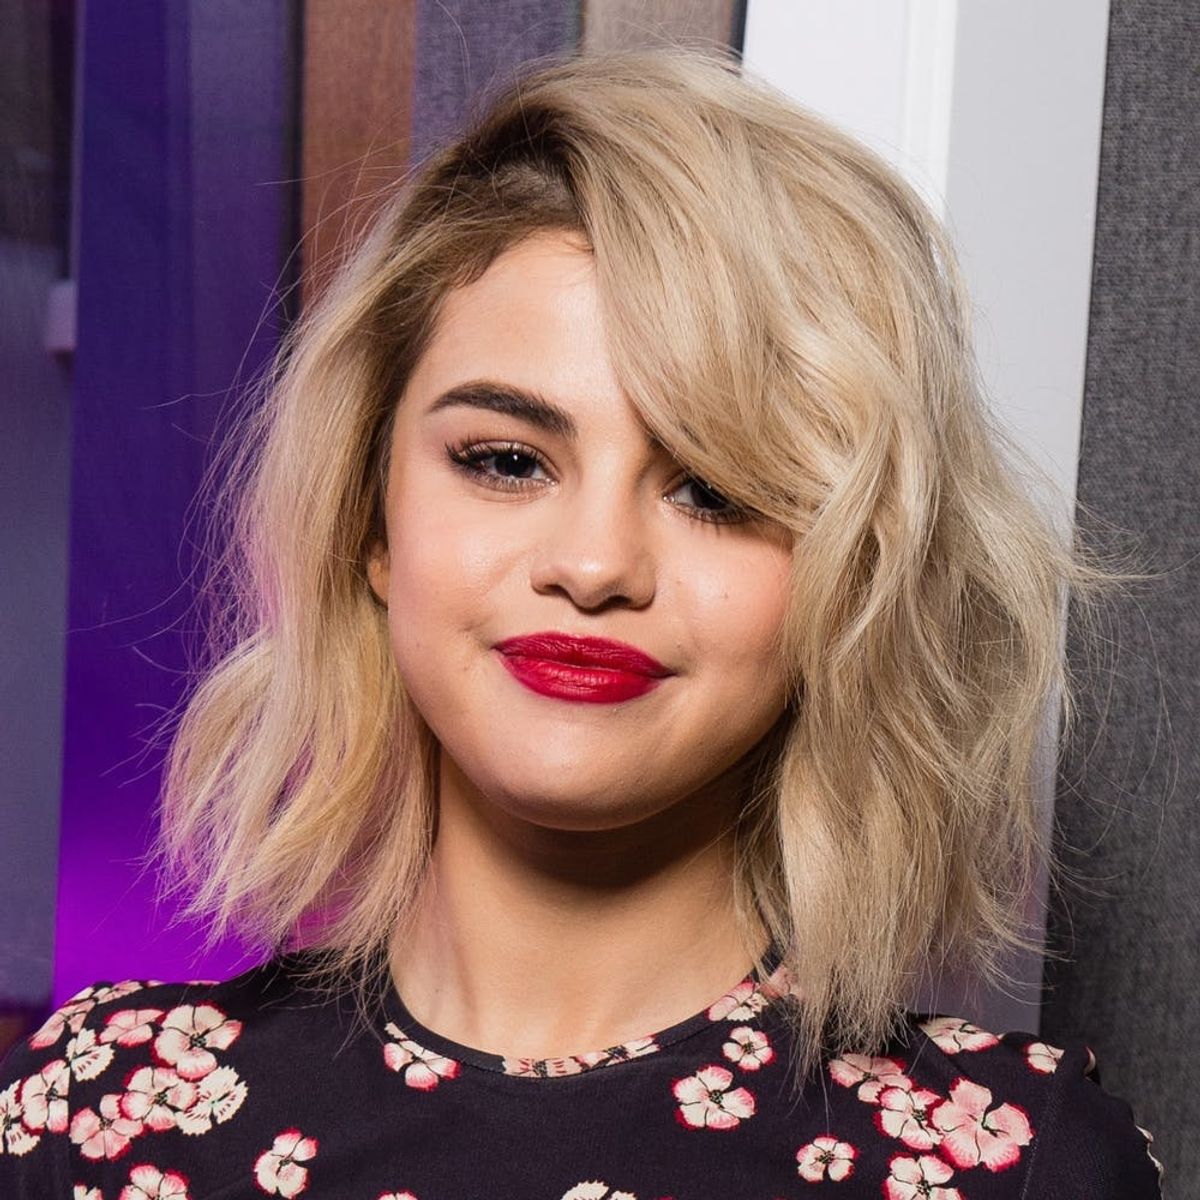 Selena Gomez Just Debuted a Totally Different Look at NYFW